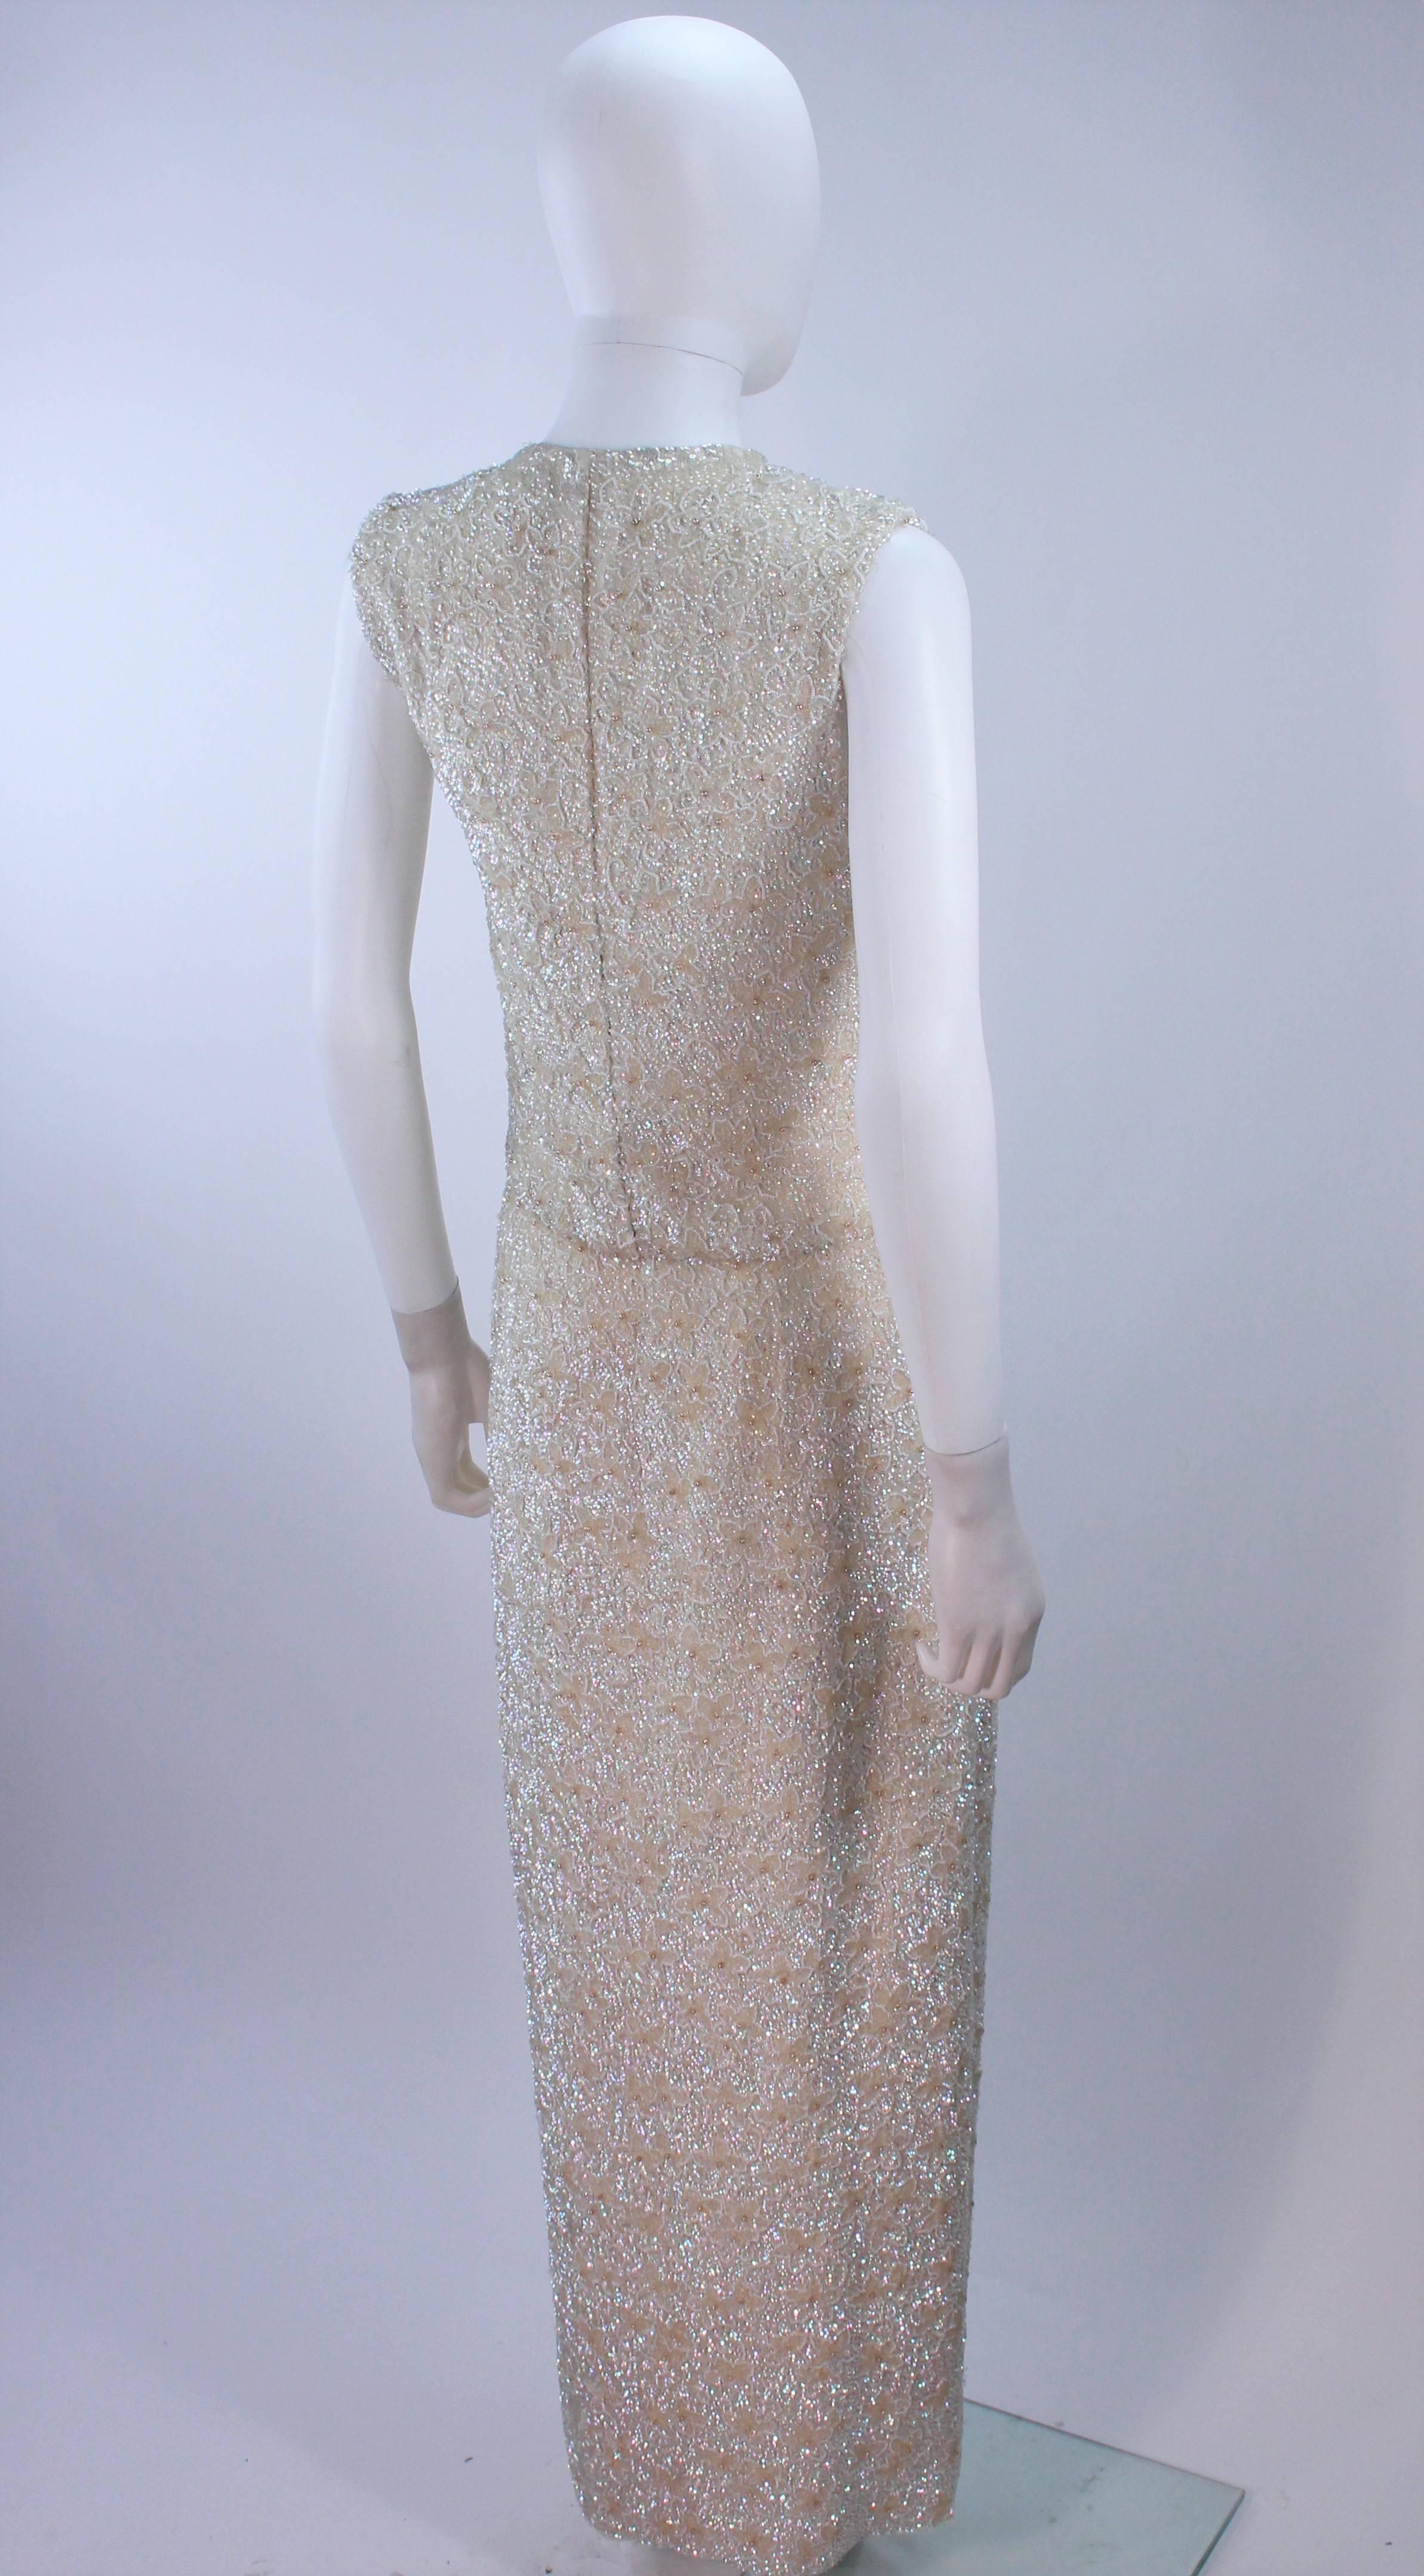 JEWELS Vintage 1950's Iridescent Beaded Gown Wedding Size 8-12 In Excellent Condition For Sale In Los Angeles, CA